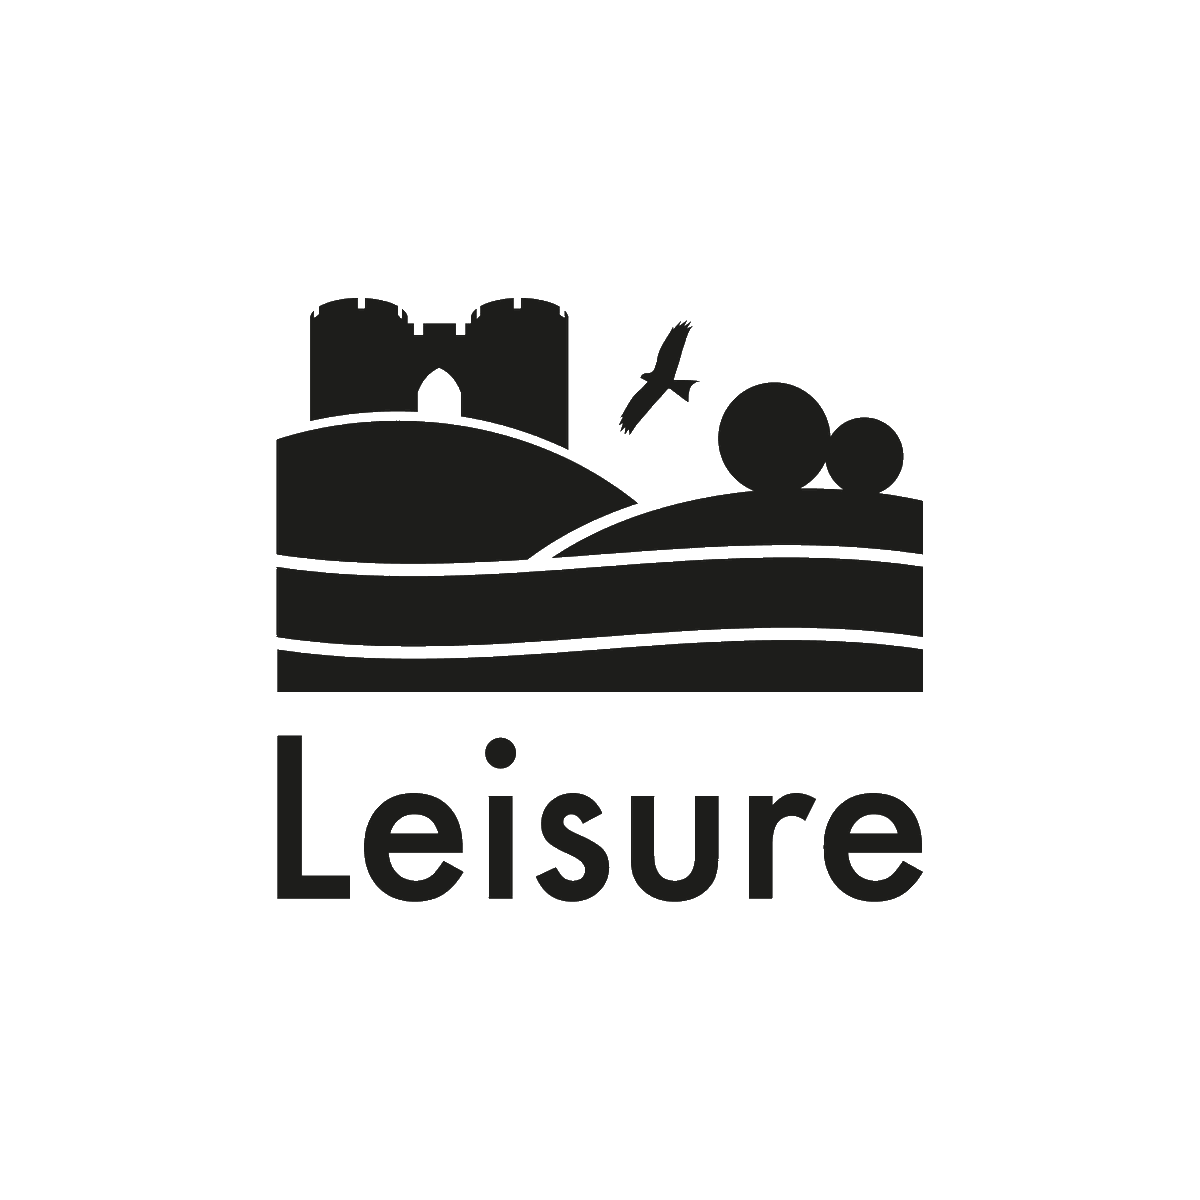 Did you know we have social media pages dedicated to our Leisure service? Please give them a follow @NN_Leisure